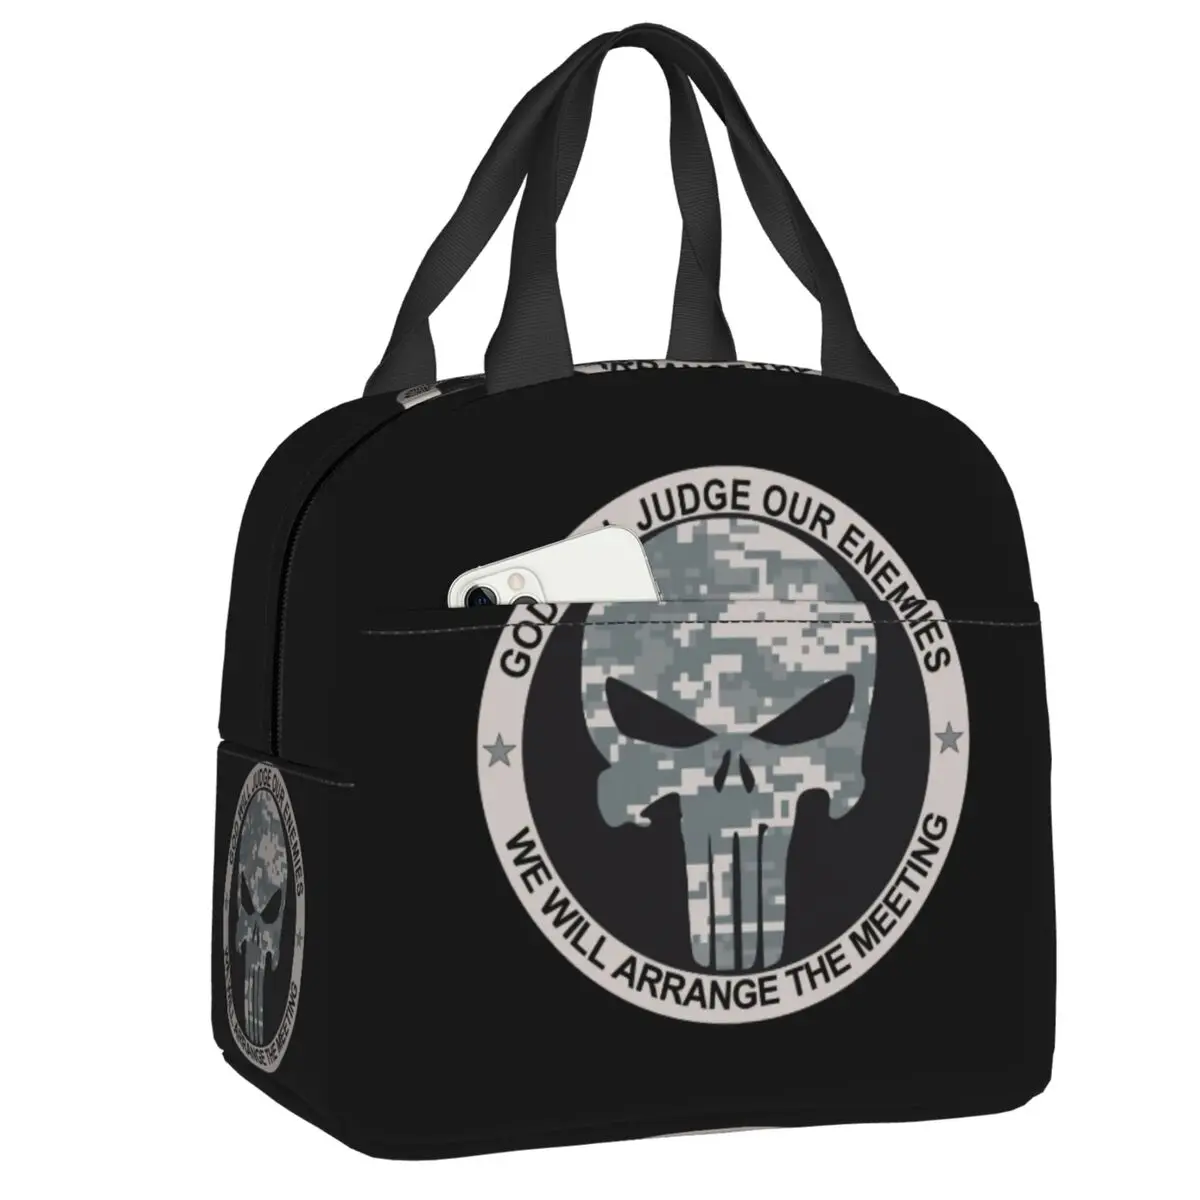 

Vintage Punishers Skeleton Skull Lunch Box Warm Cooler Thermal Food Insulated Lunch Bag for Women Kids School Picnic Tote Bags